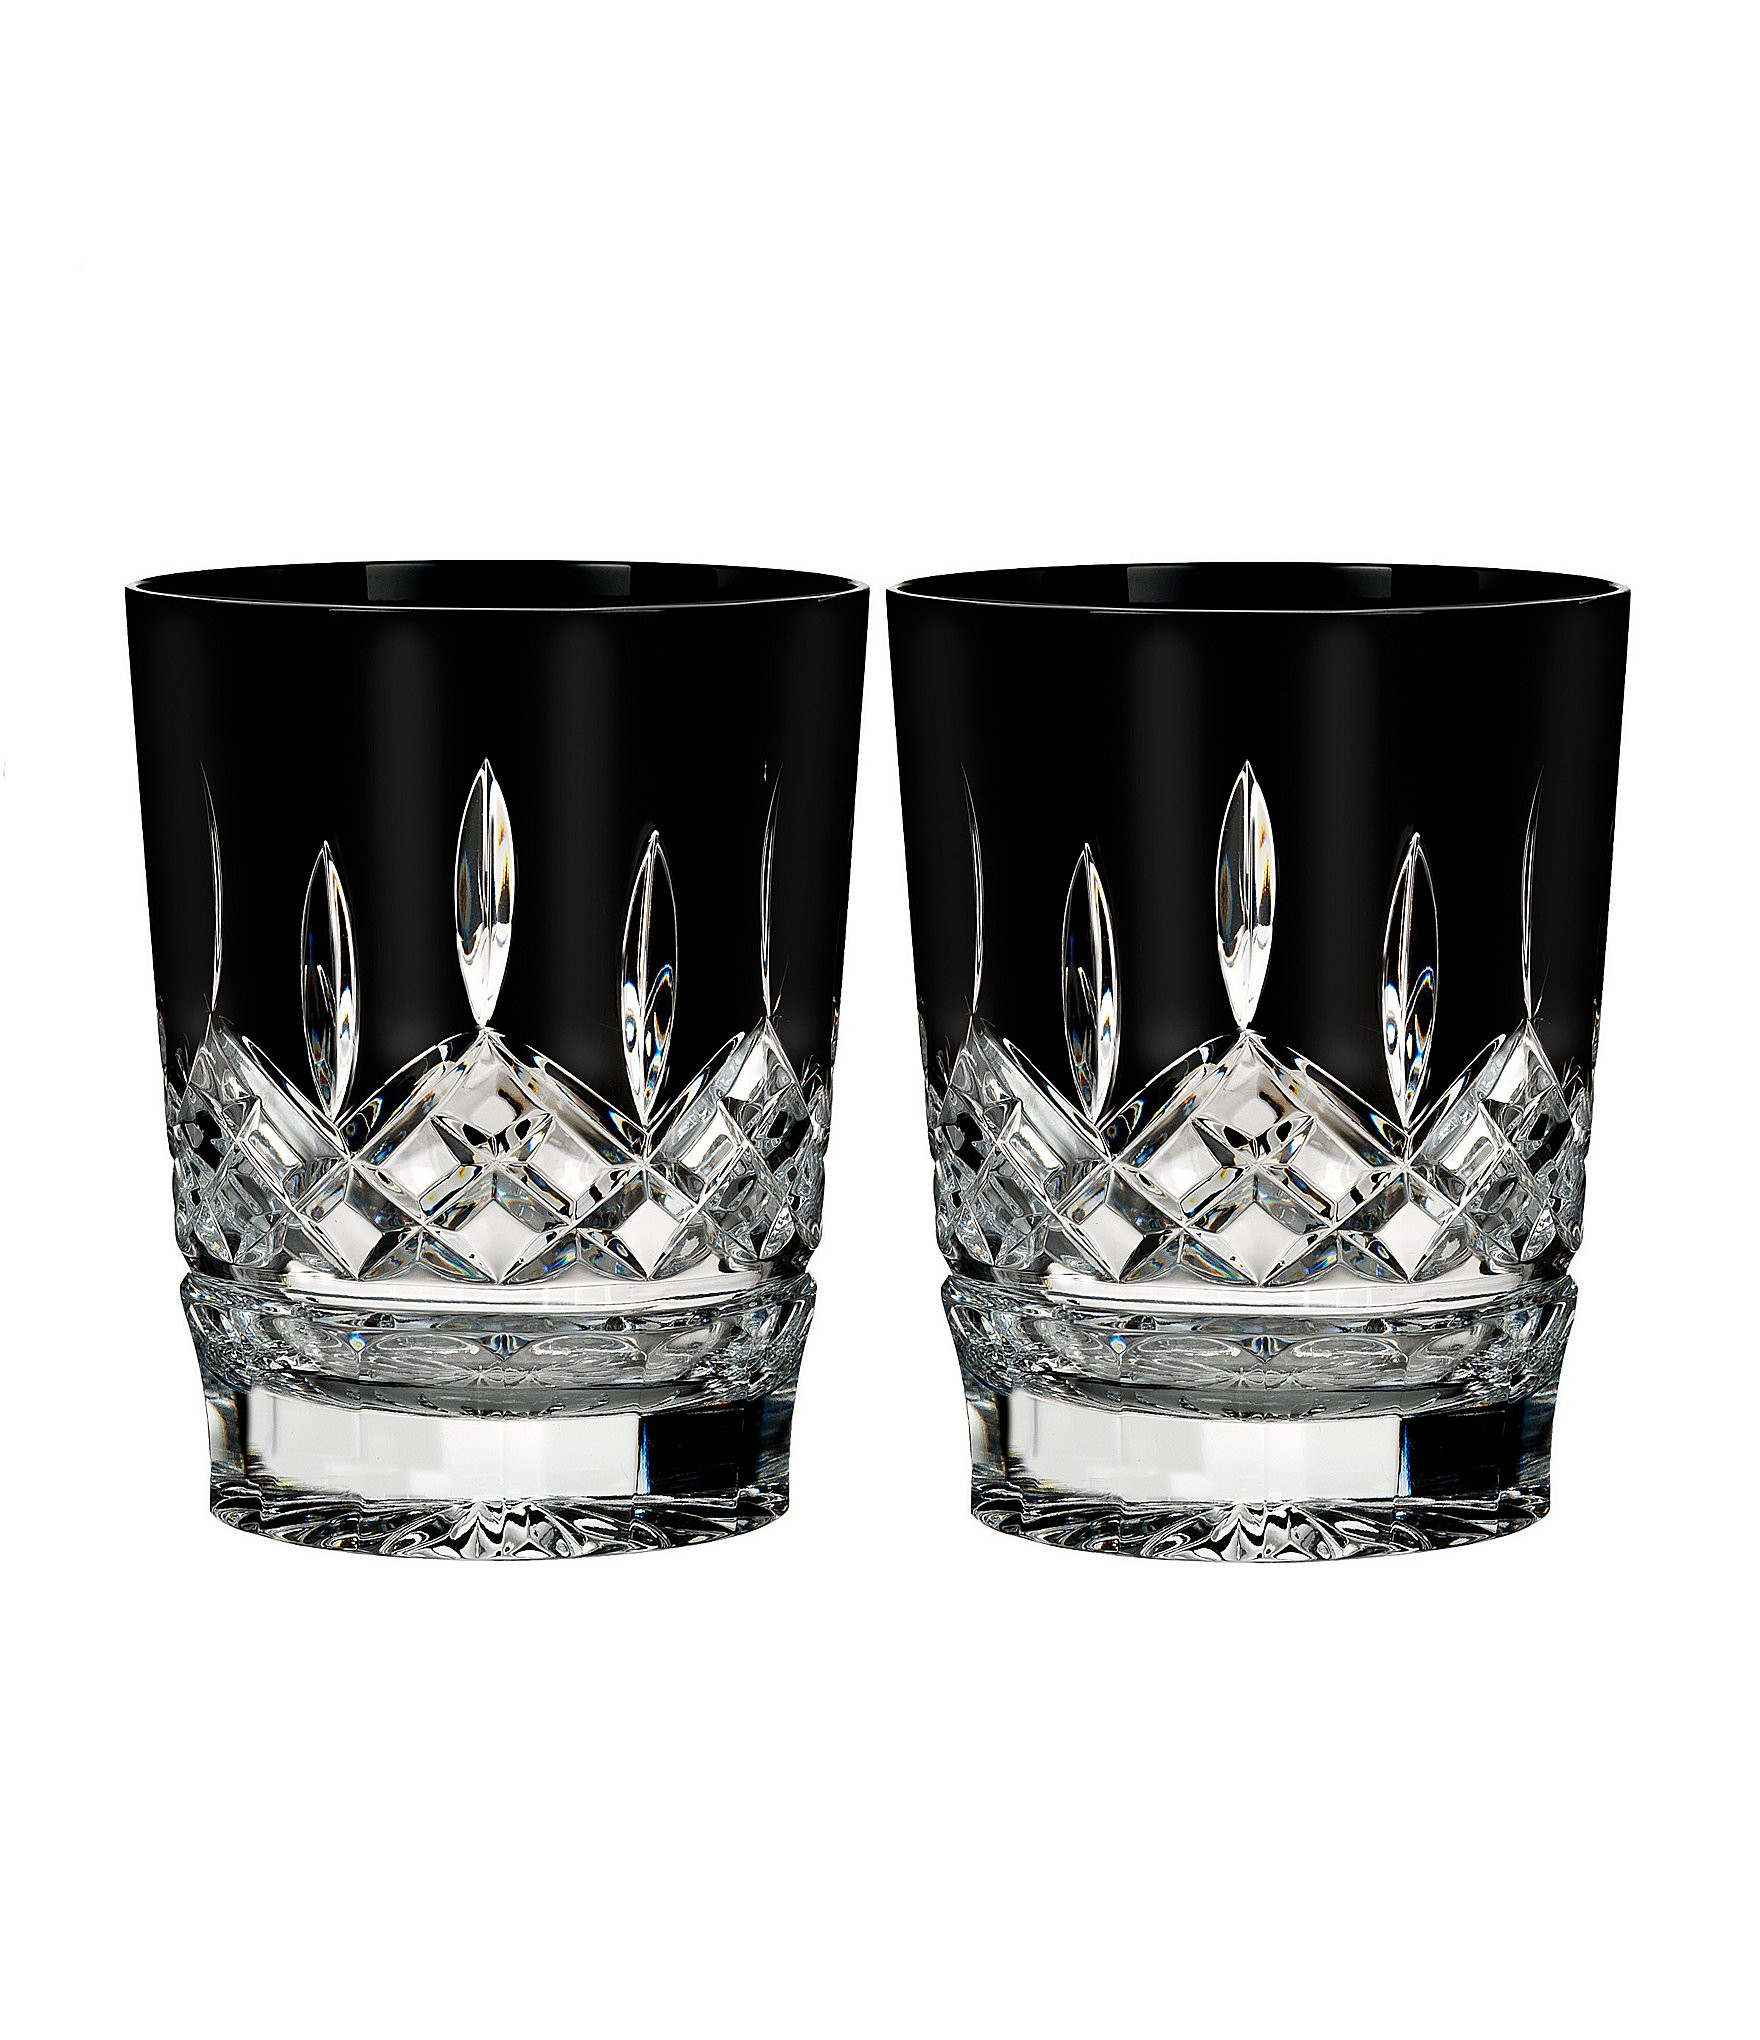 29 Great Waterford Sugar Bud Vase 2024 free download waterford sugar bud vase of waterford crystal lismore home kitchen dining bedding dillards with 04998418 zi black